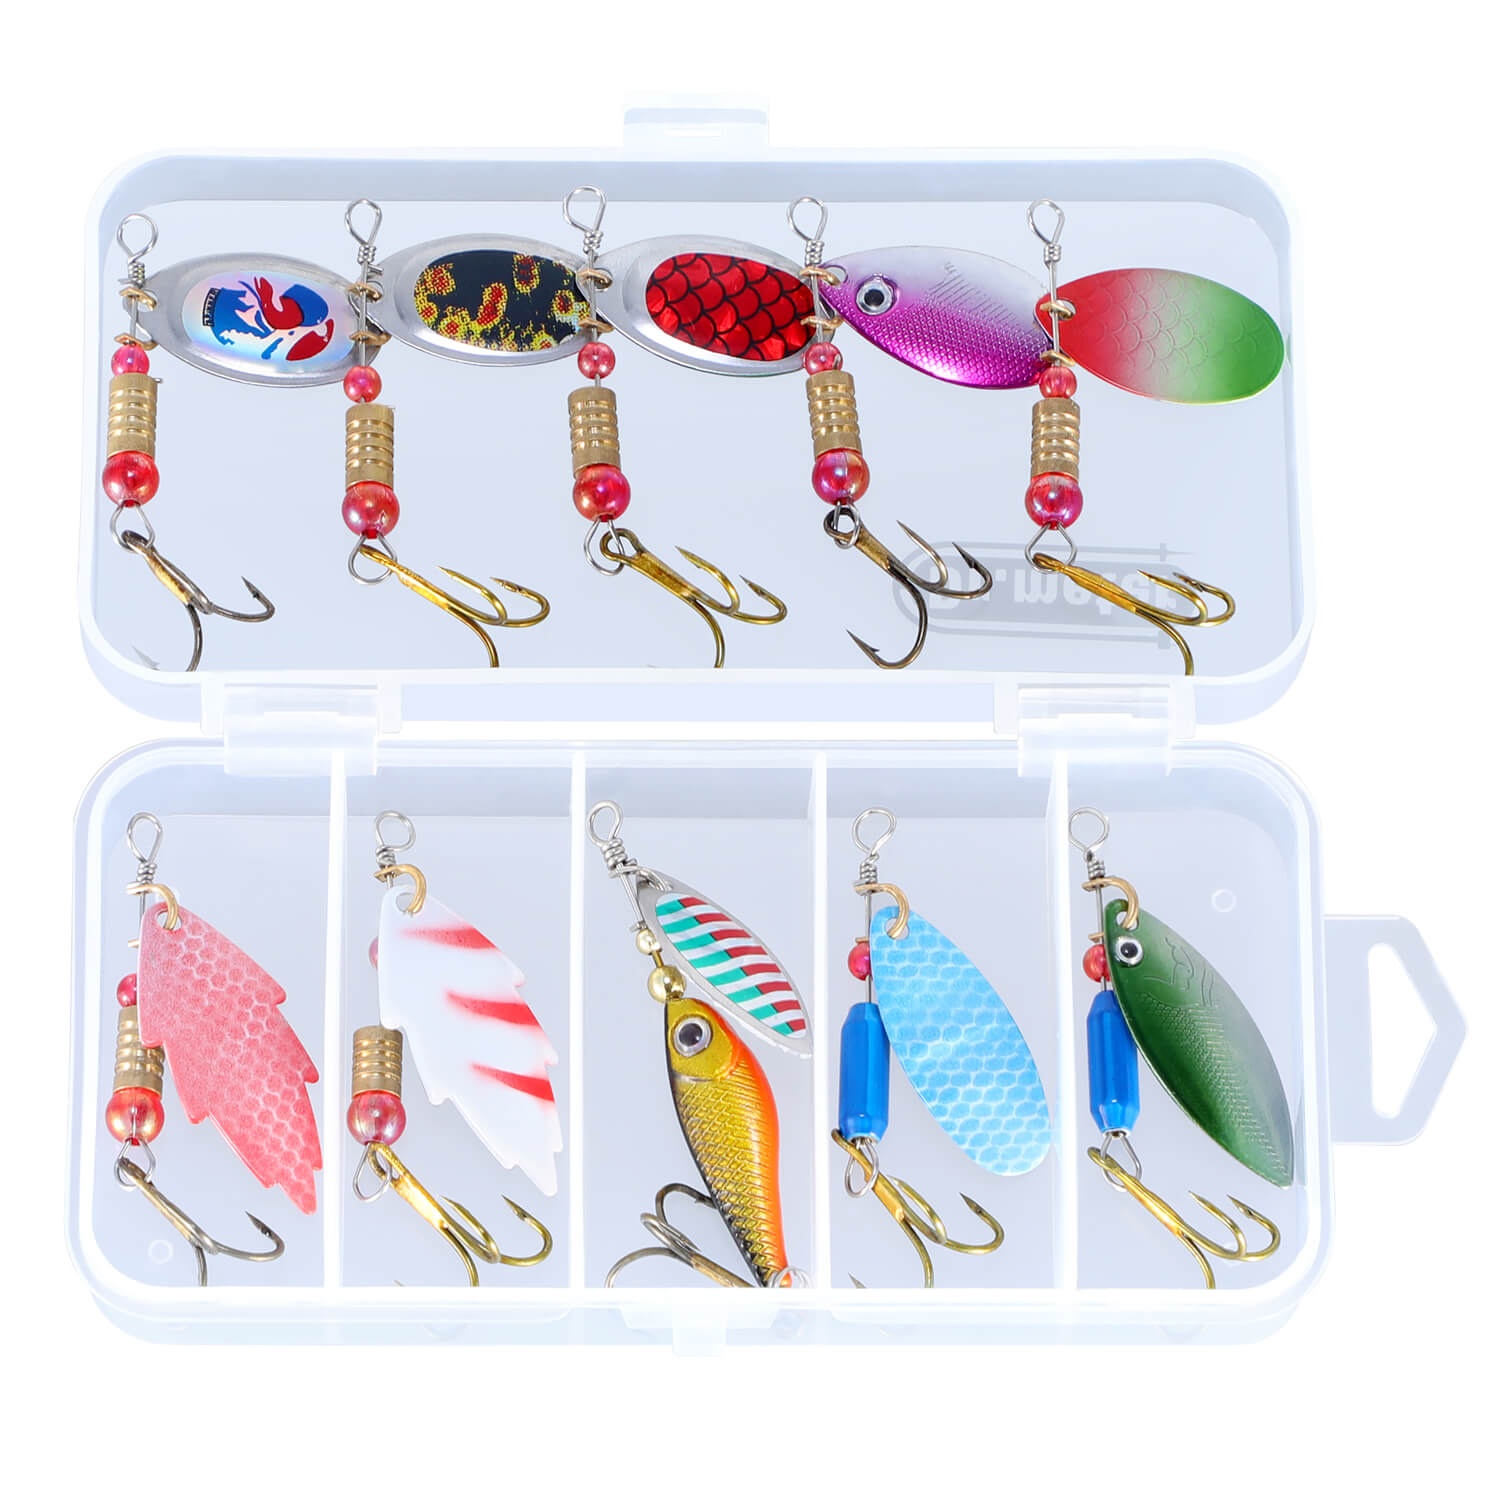 Fishing Lure - Crankbaits Hard Baits Kit for Bass Trout - Dr.Fish